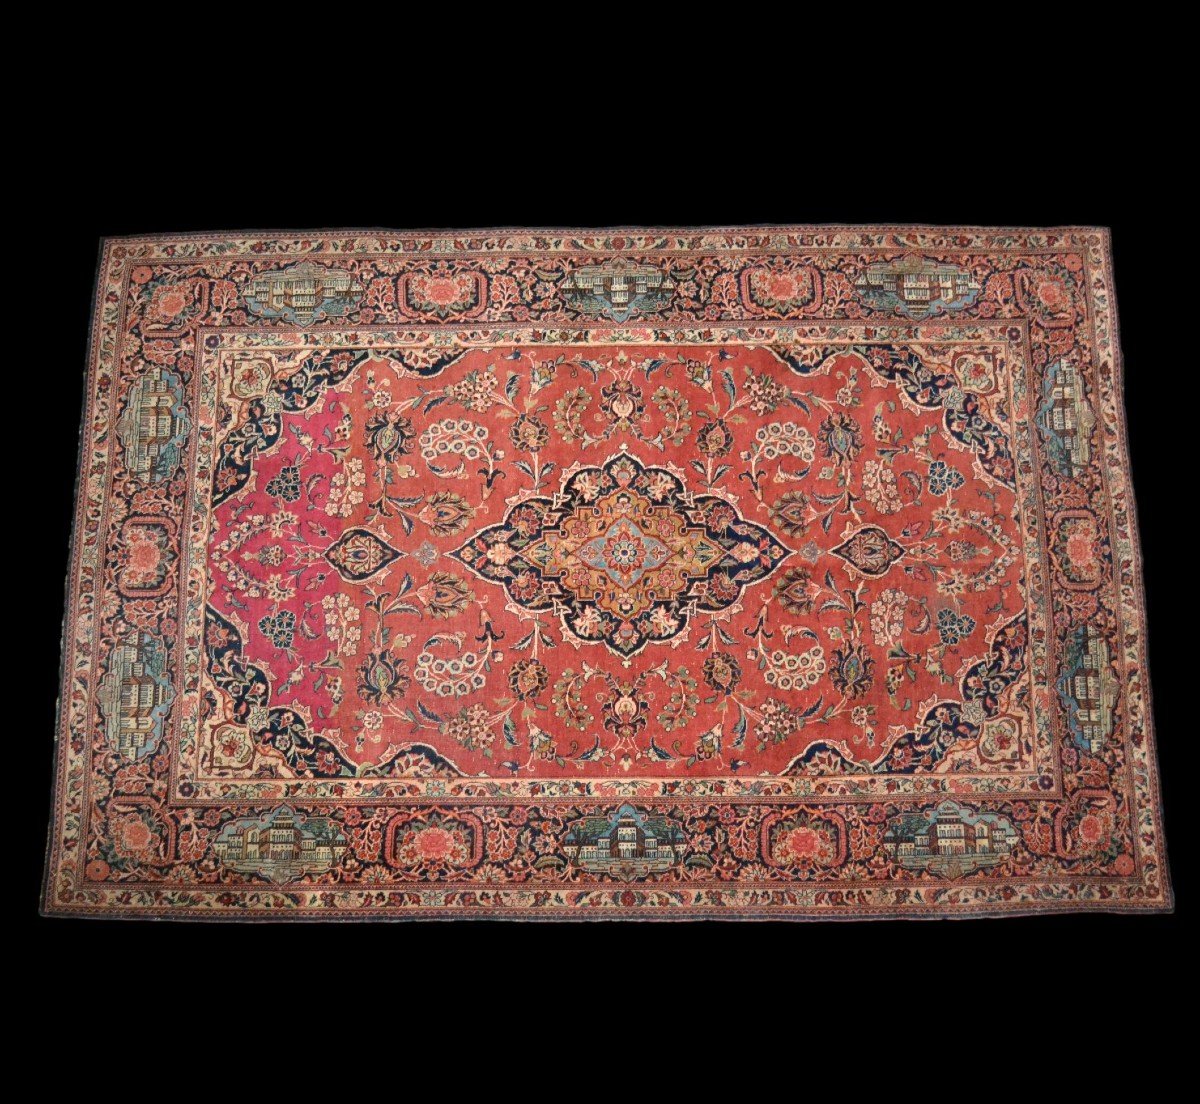 Antique Kashan Rug, 136 X 208 Cm, Hand-knotted Wool And Silk, Persia, (iran) Mid-19th Century-photo-2